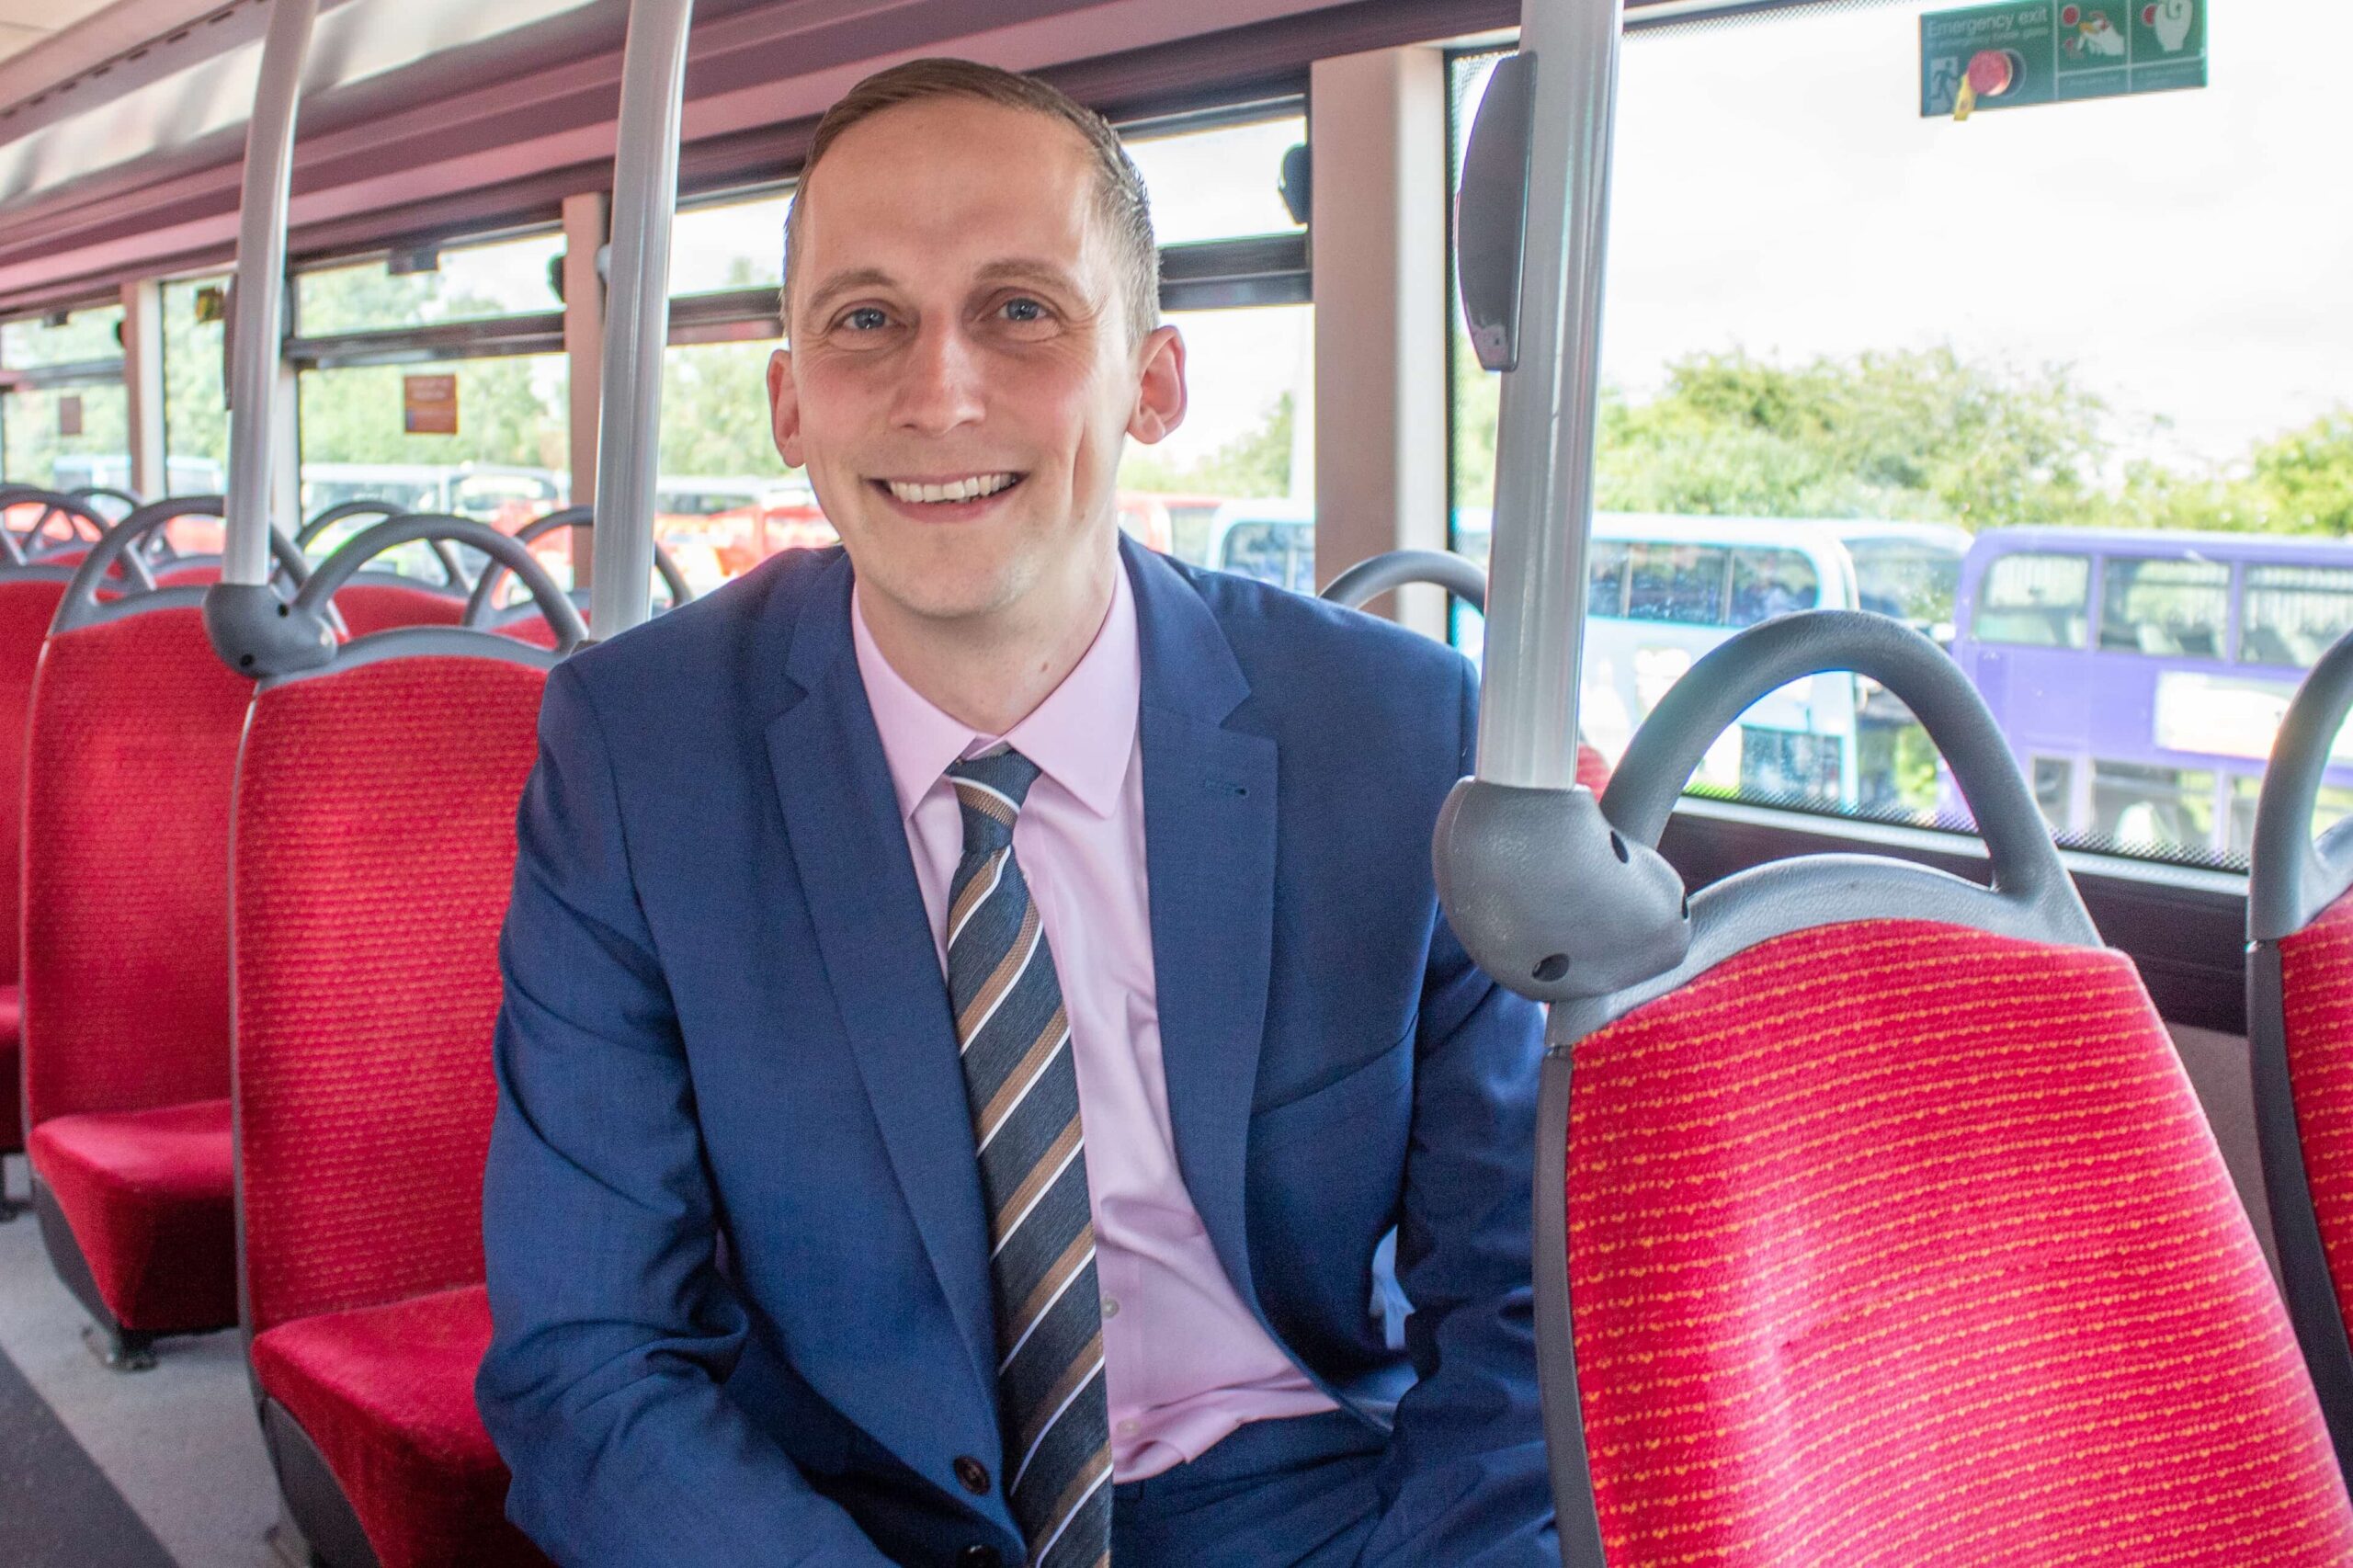 Luke Marion, MD of carousel buses sat on a bus with red seats